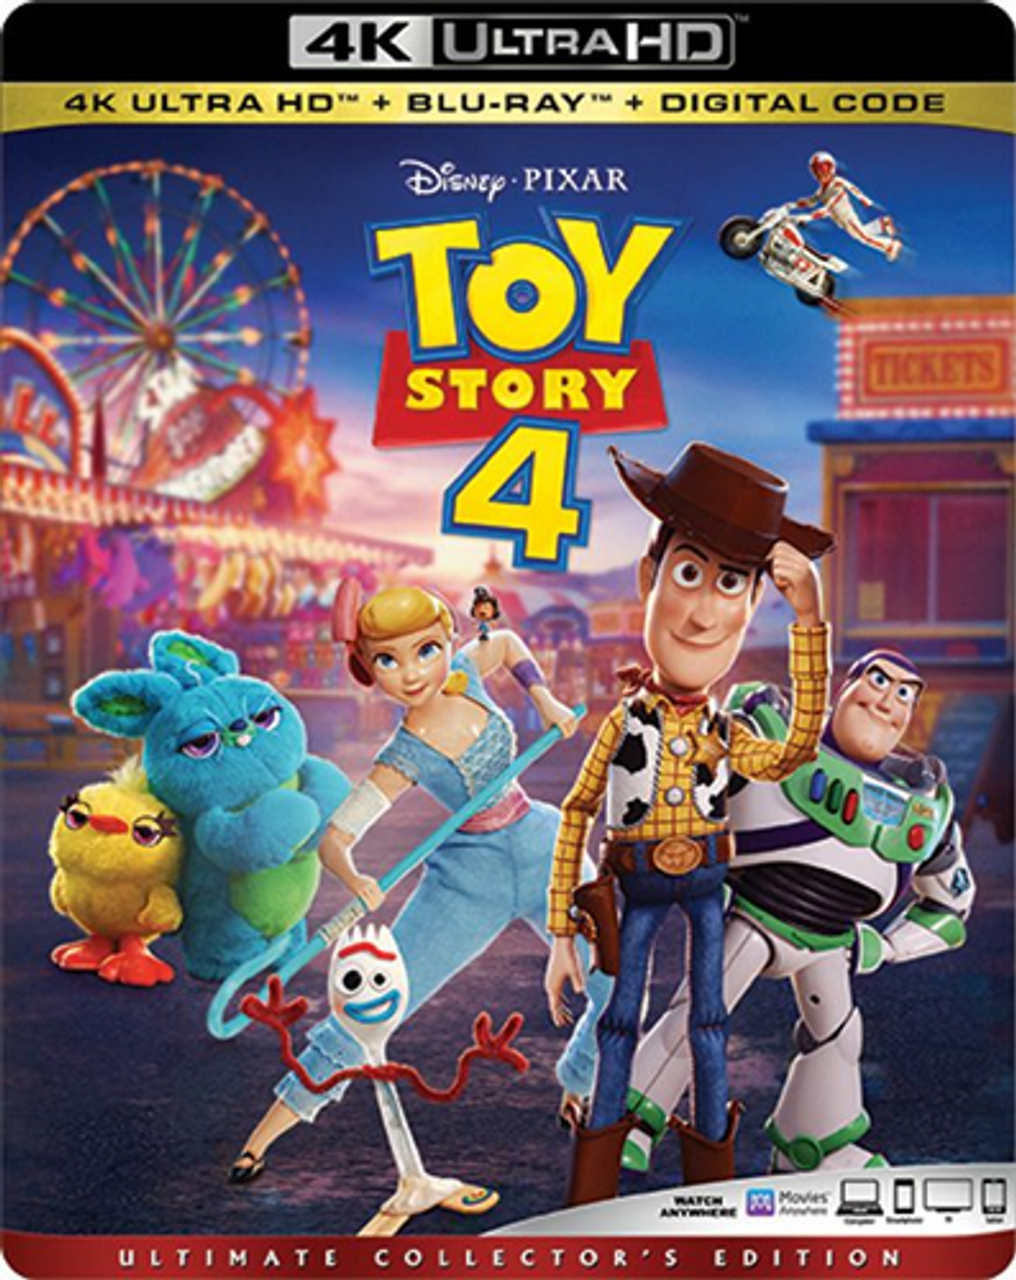 Toy Story 4 in 4K